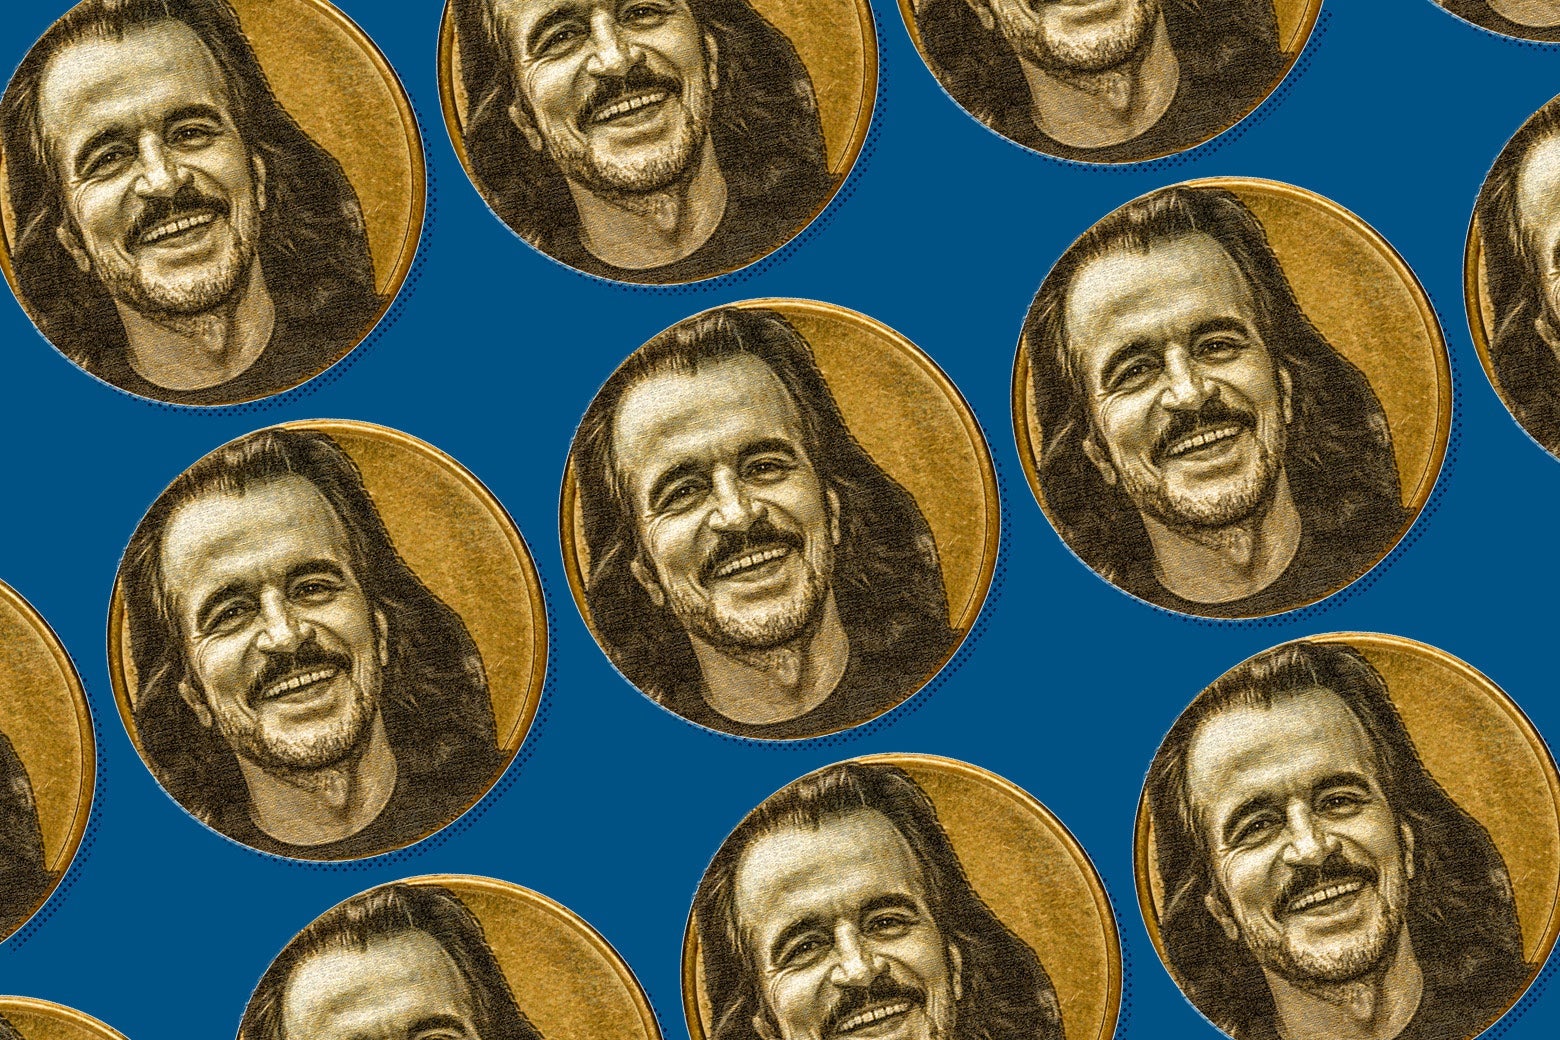 Coins with Yanni’s face on them.